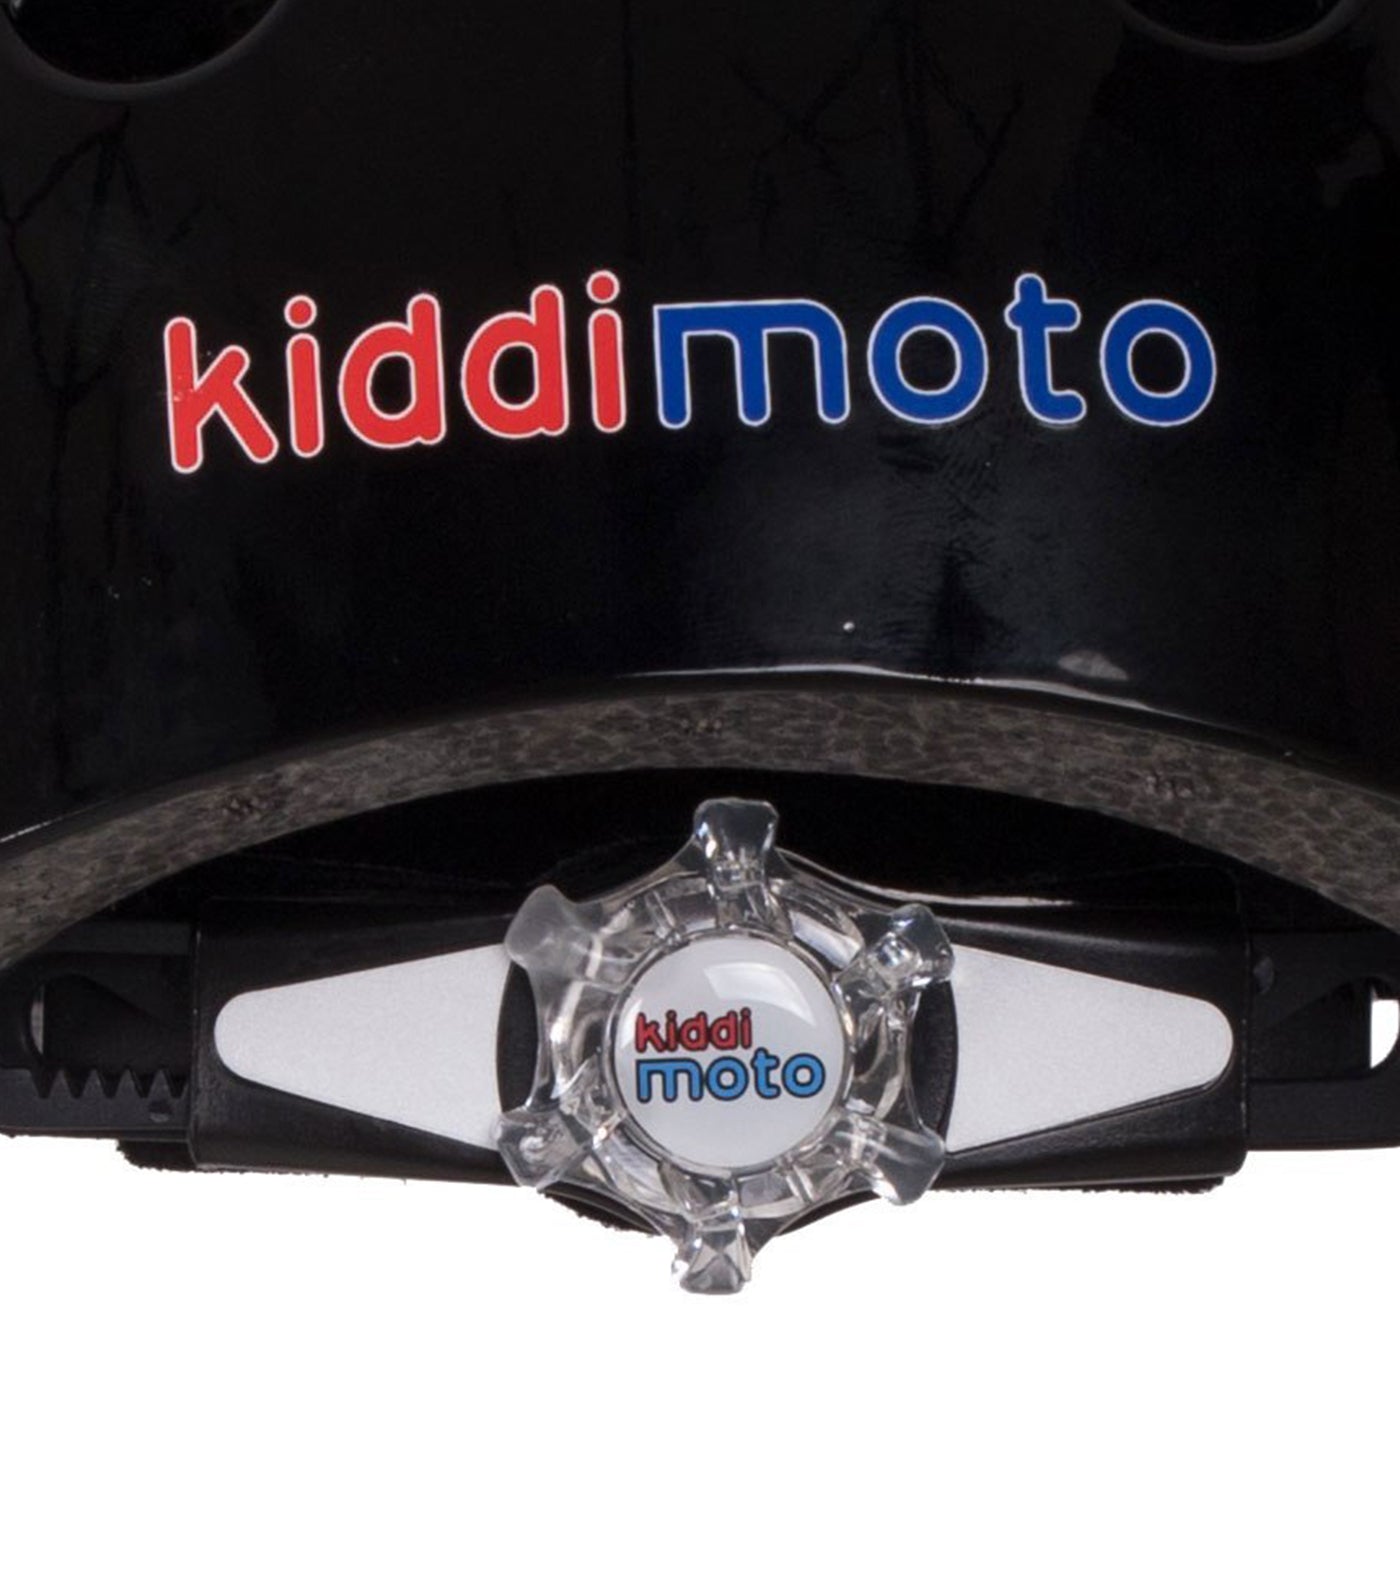 Kids Cycling Helmet - Red Goggle